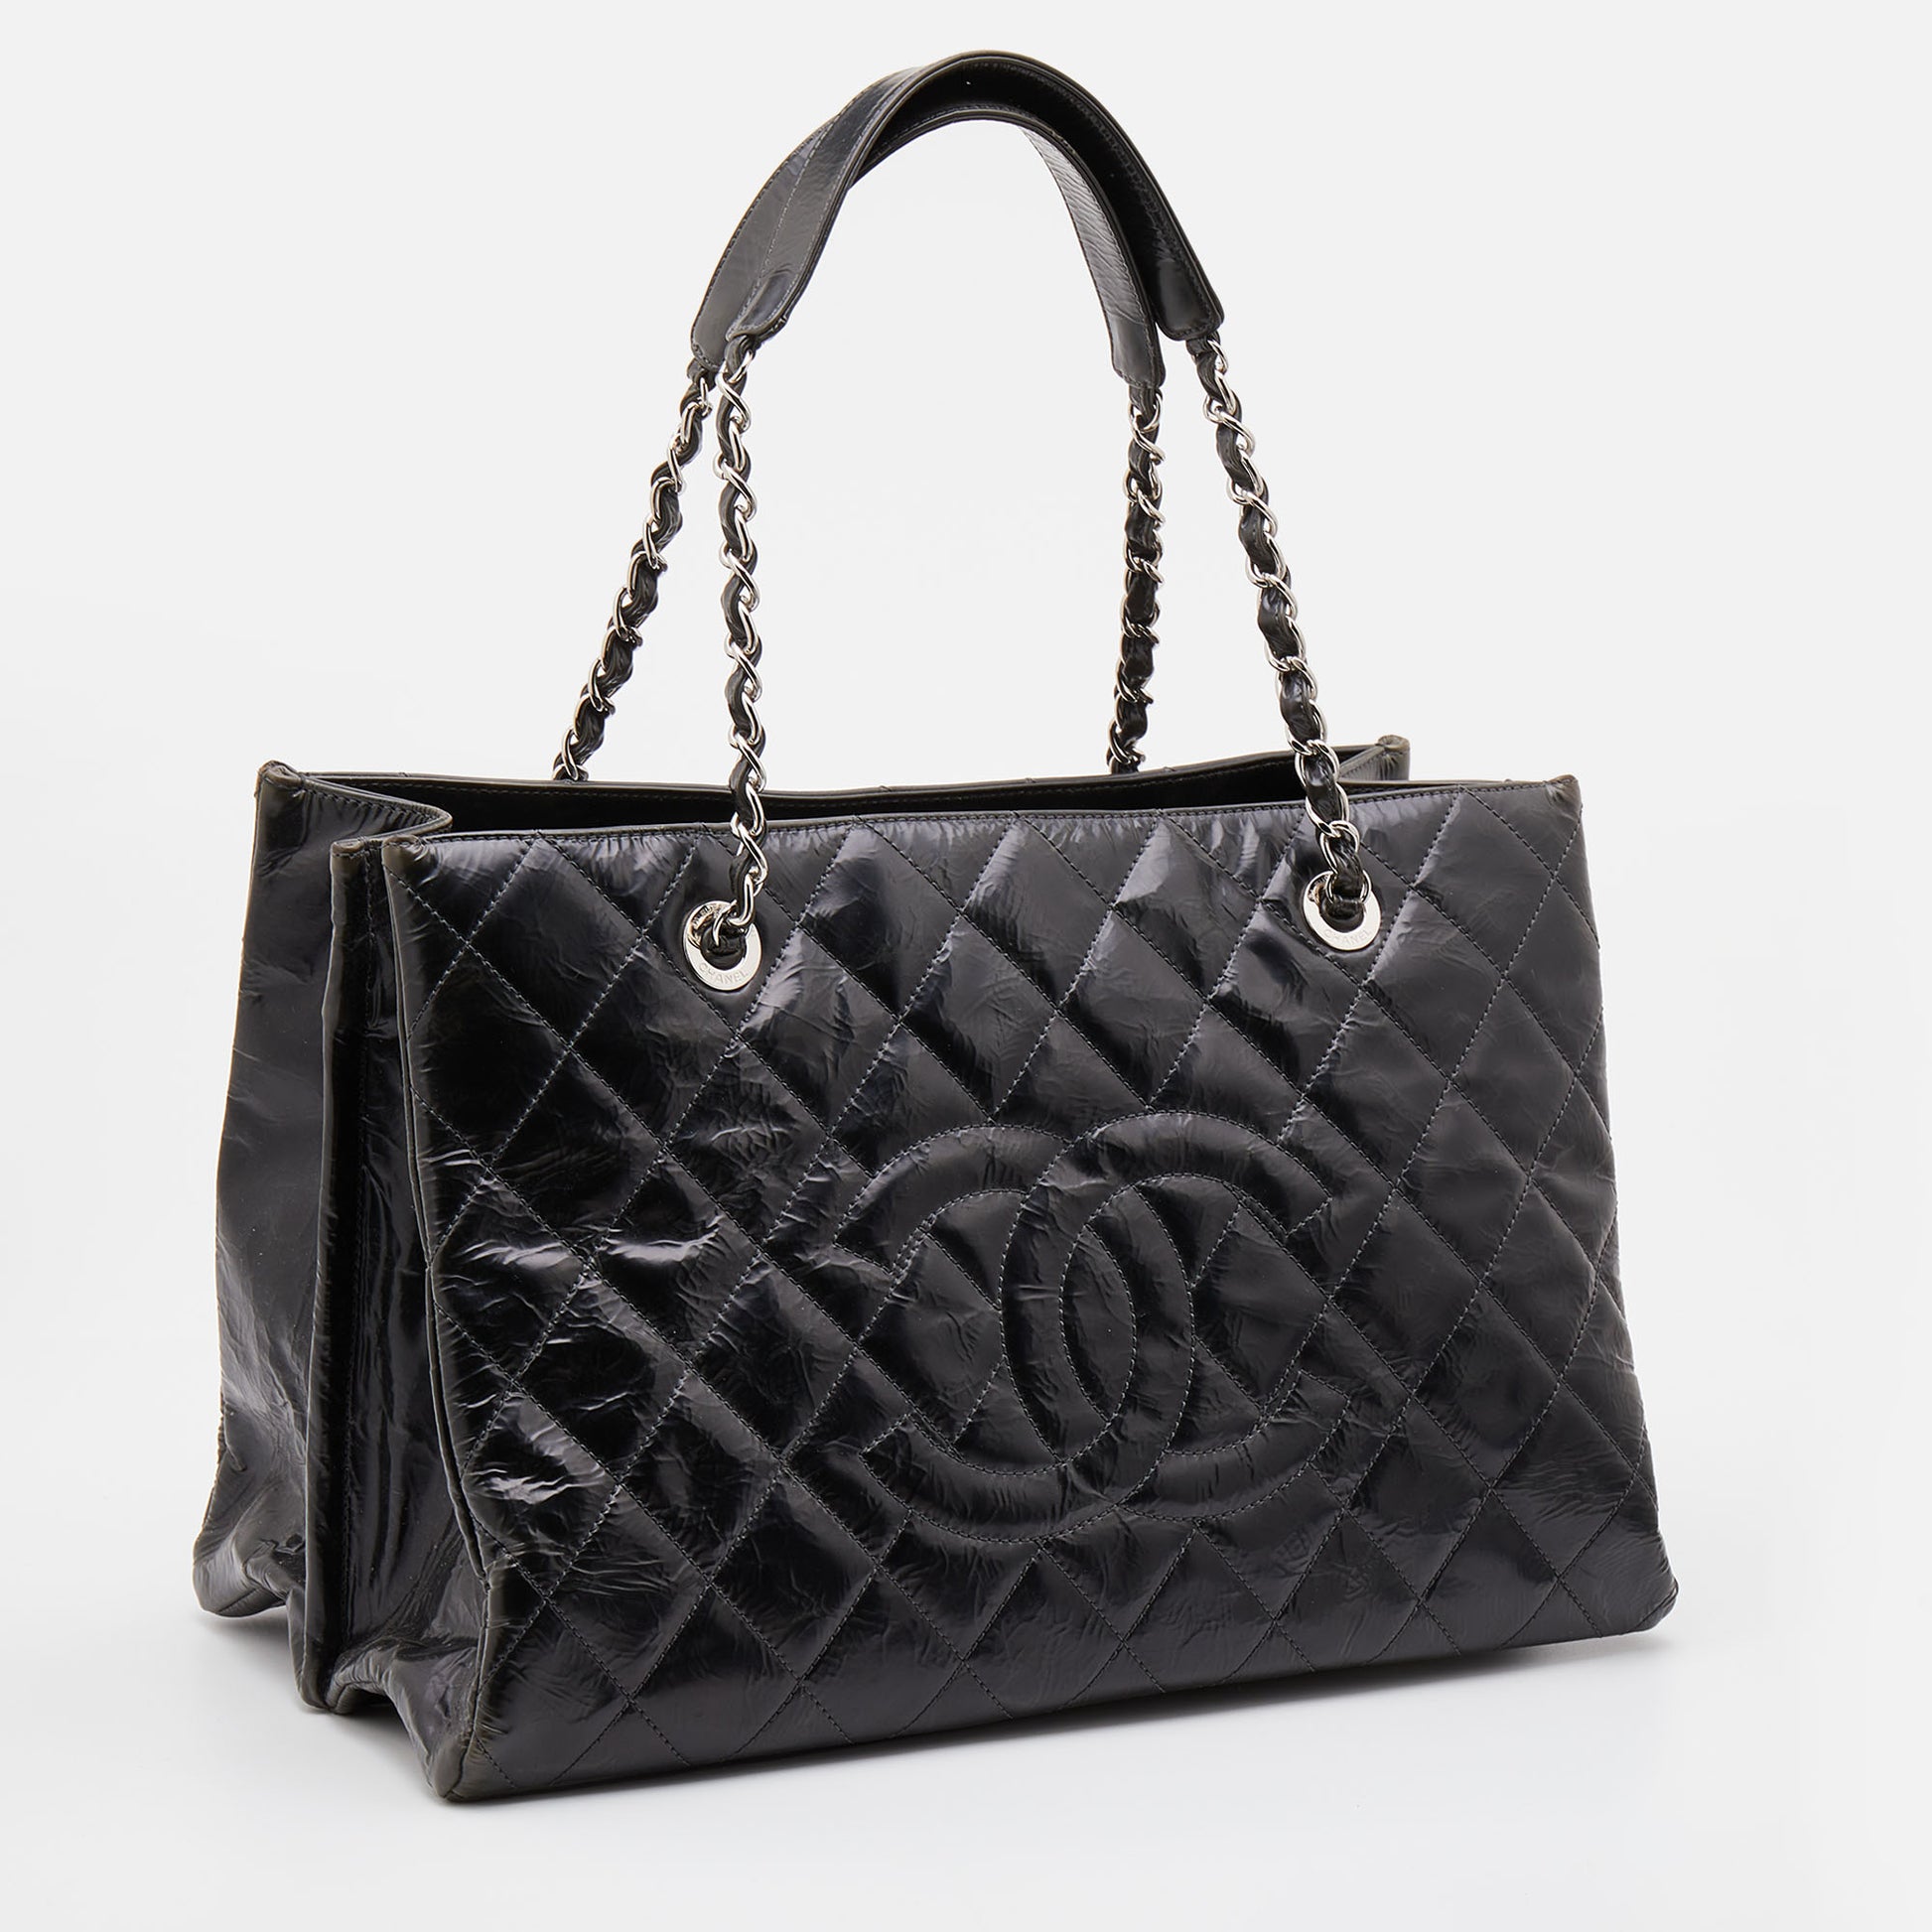 Chanel Dark Grey Quilted Leather Large Shopping Tote